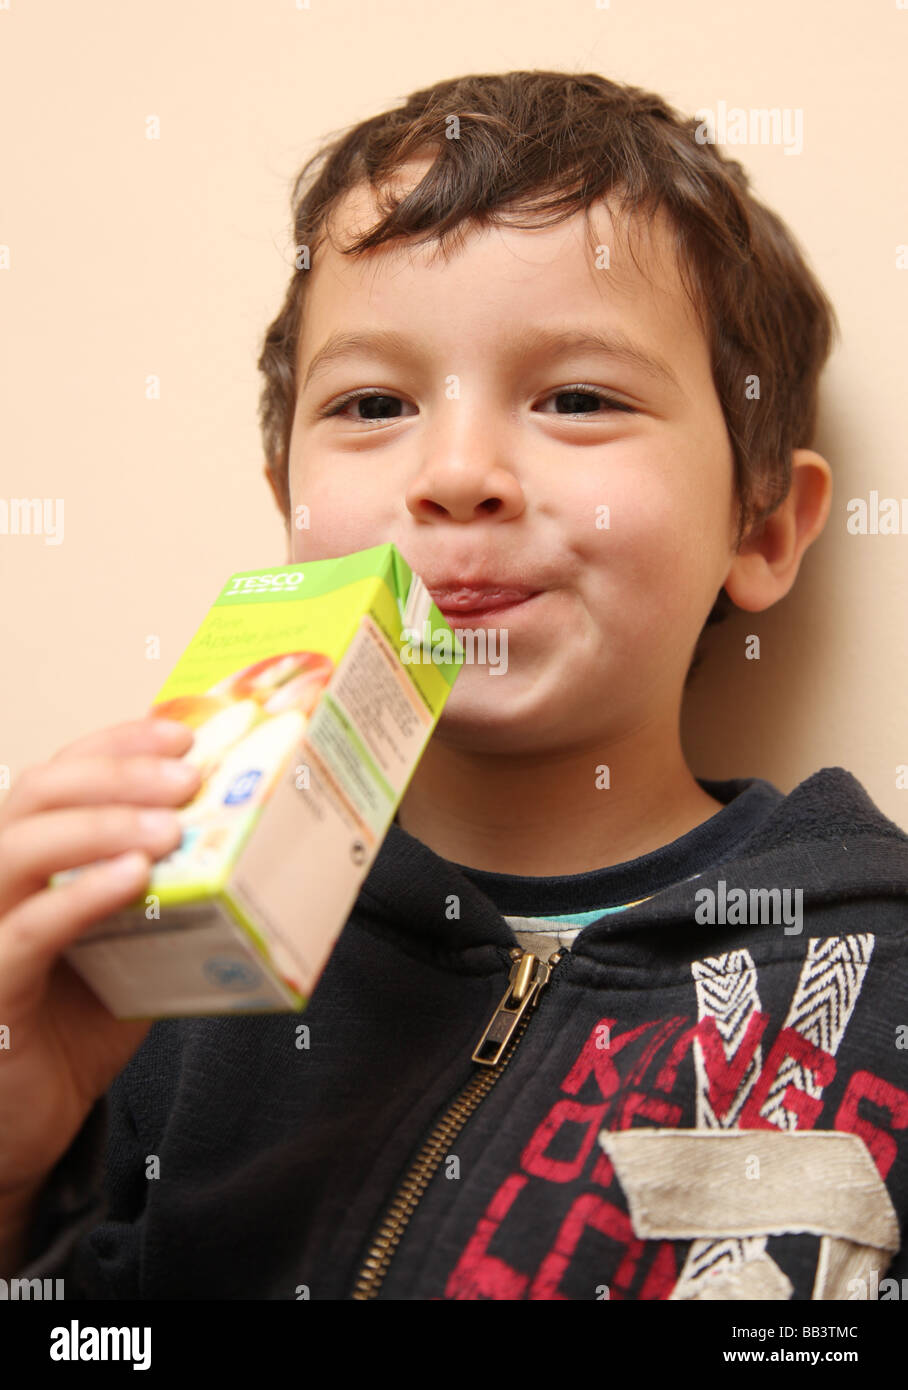 3 year old boy drinking a carton of juice Stock Photo